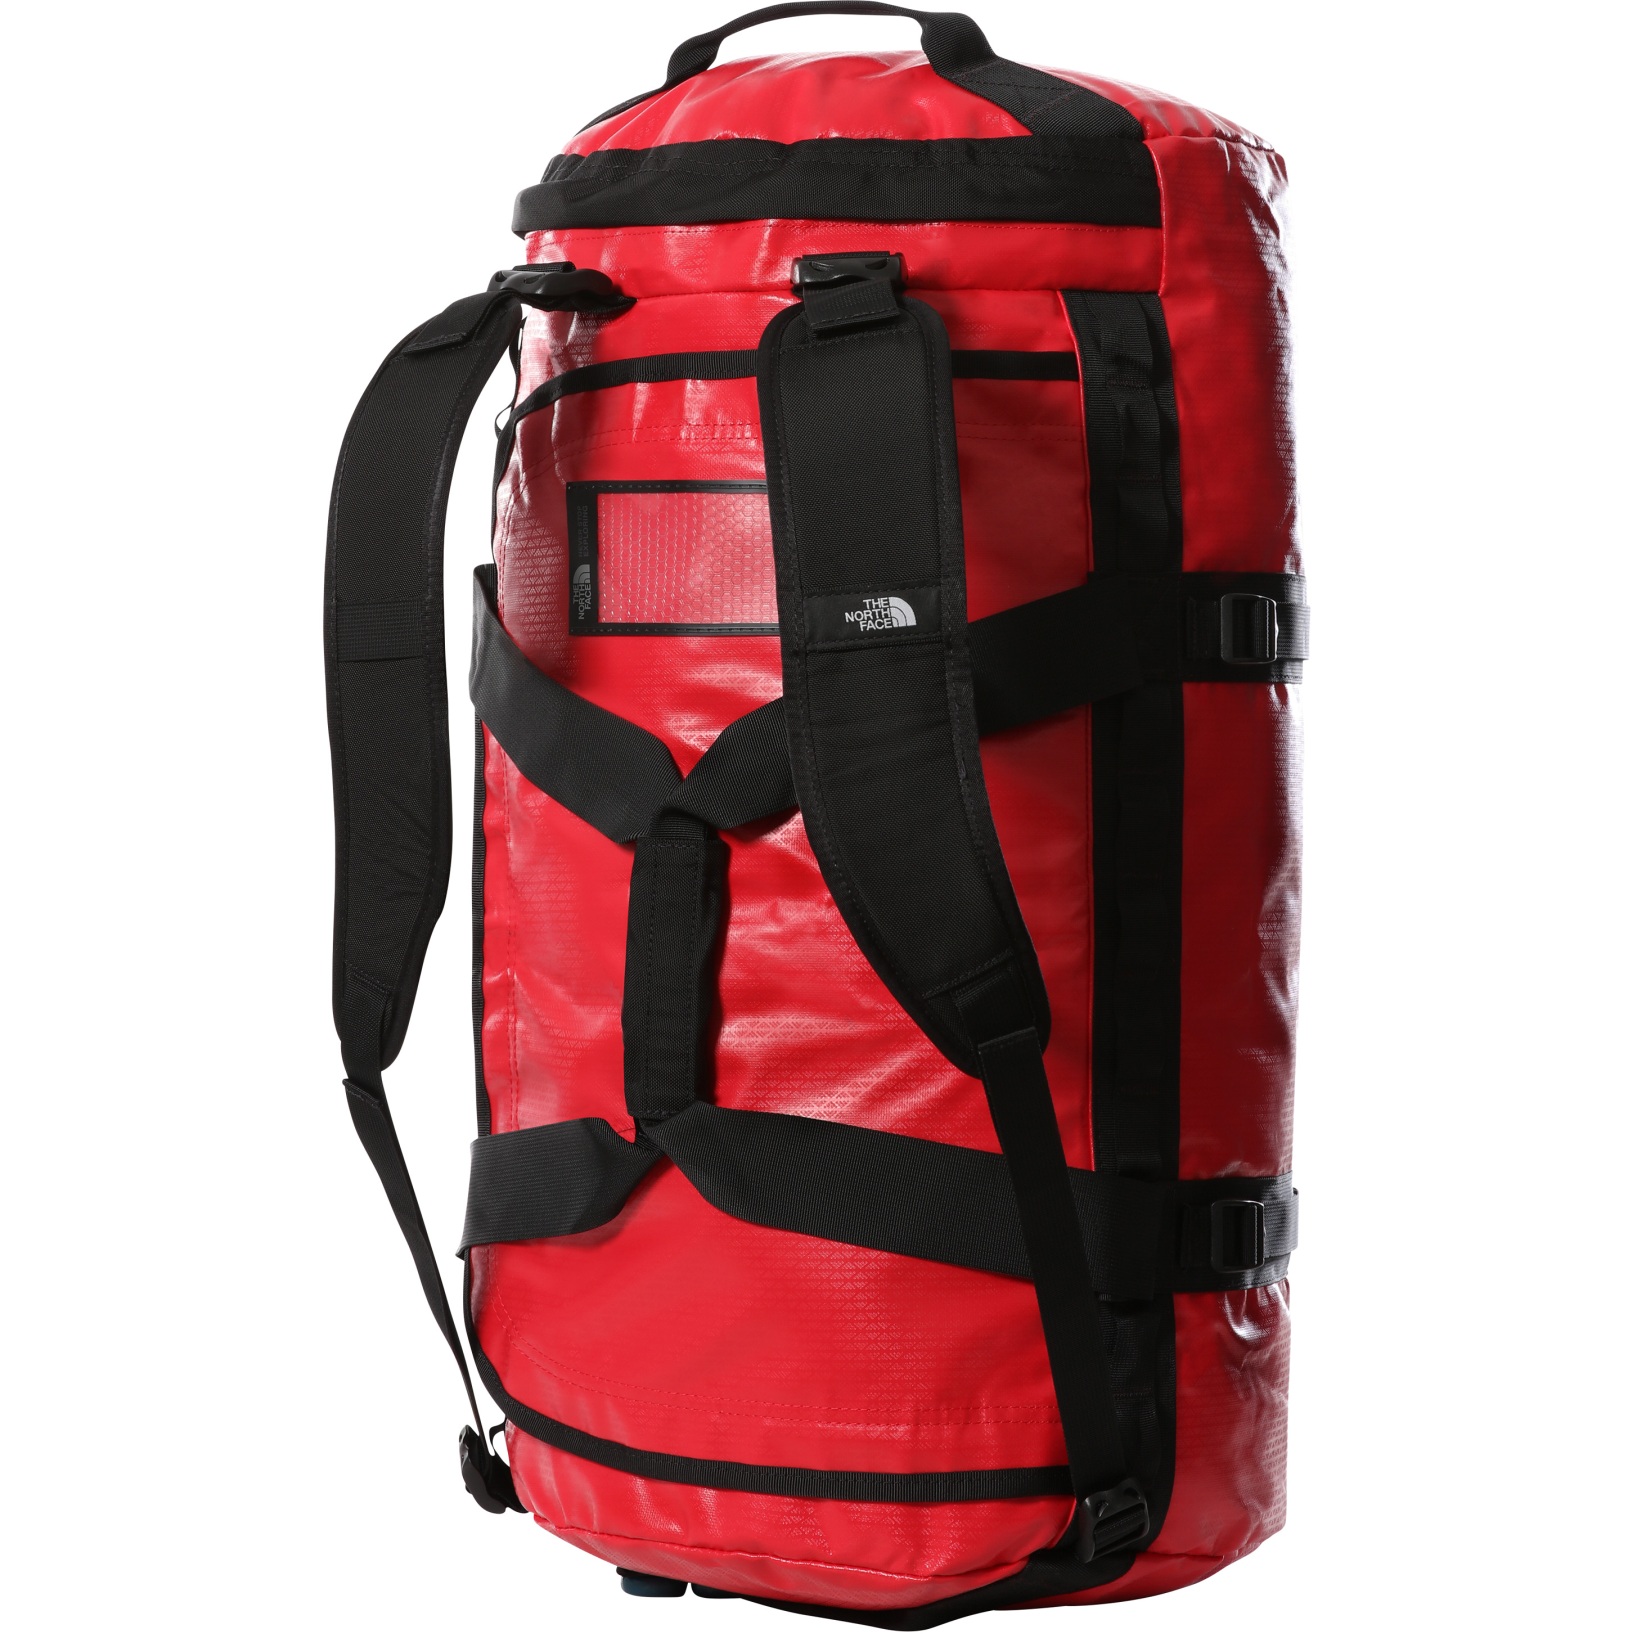 Sac voyage The North Face Base Camp Duffel M red / black